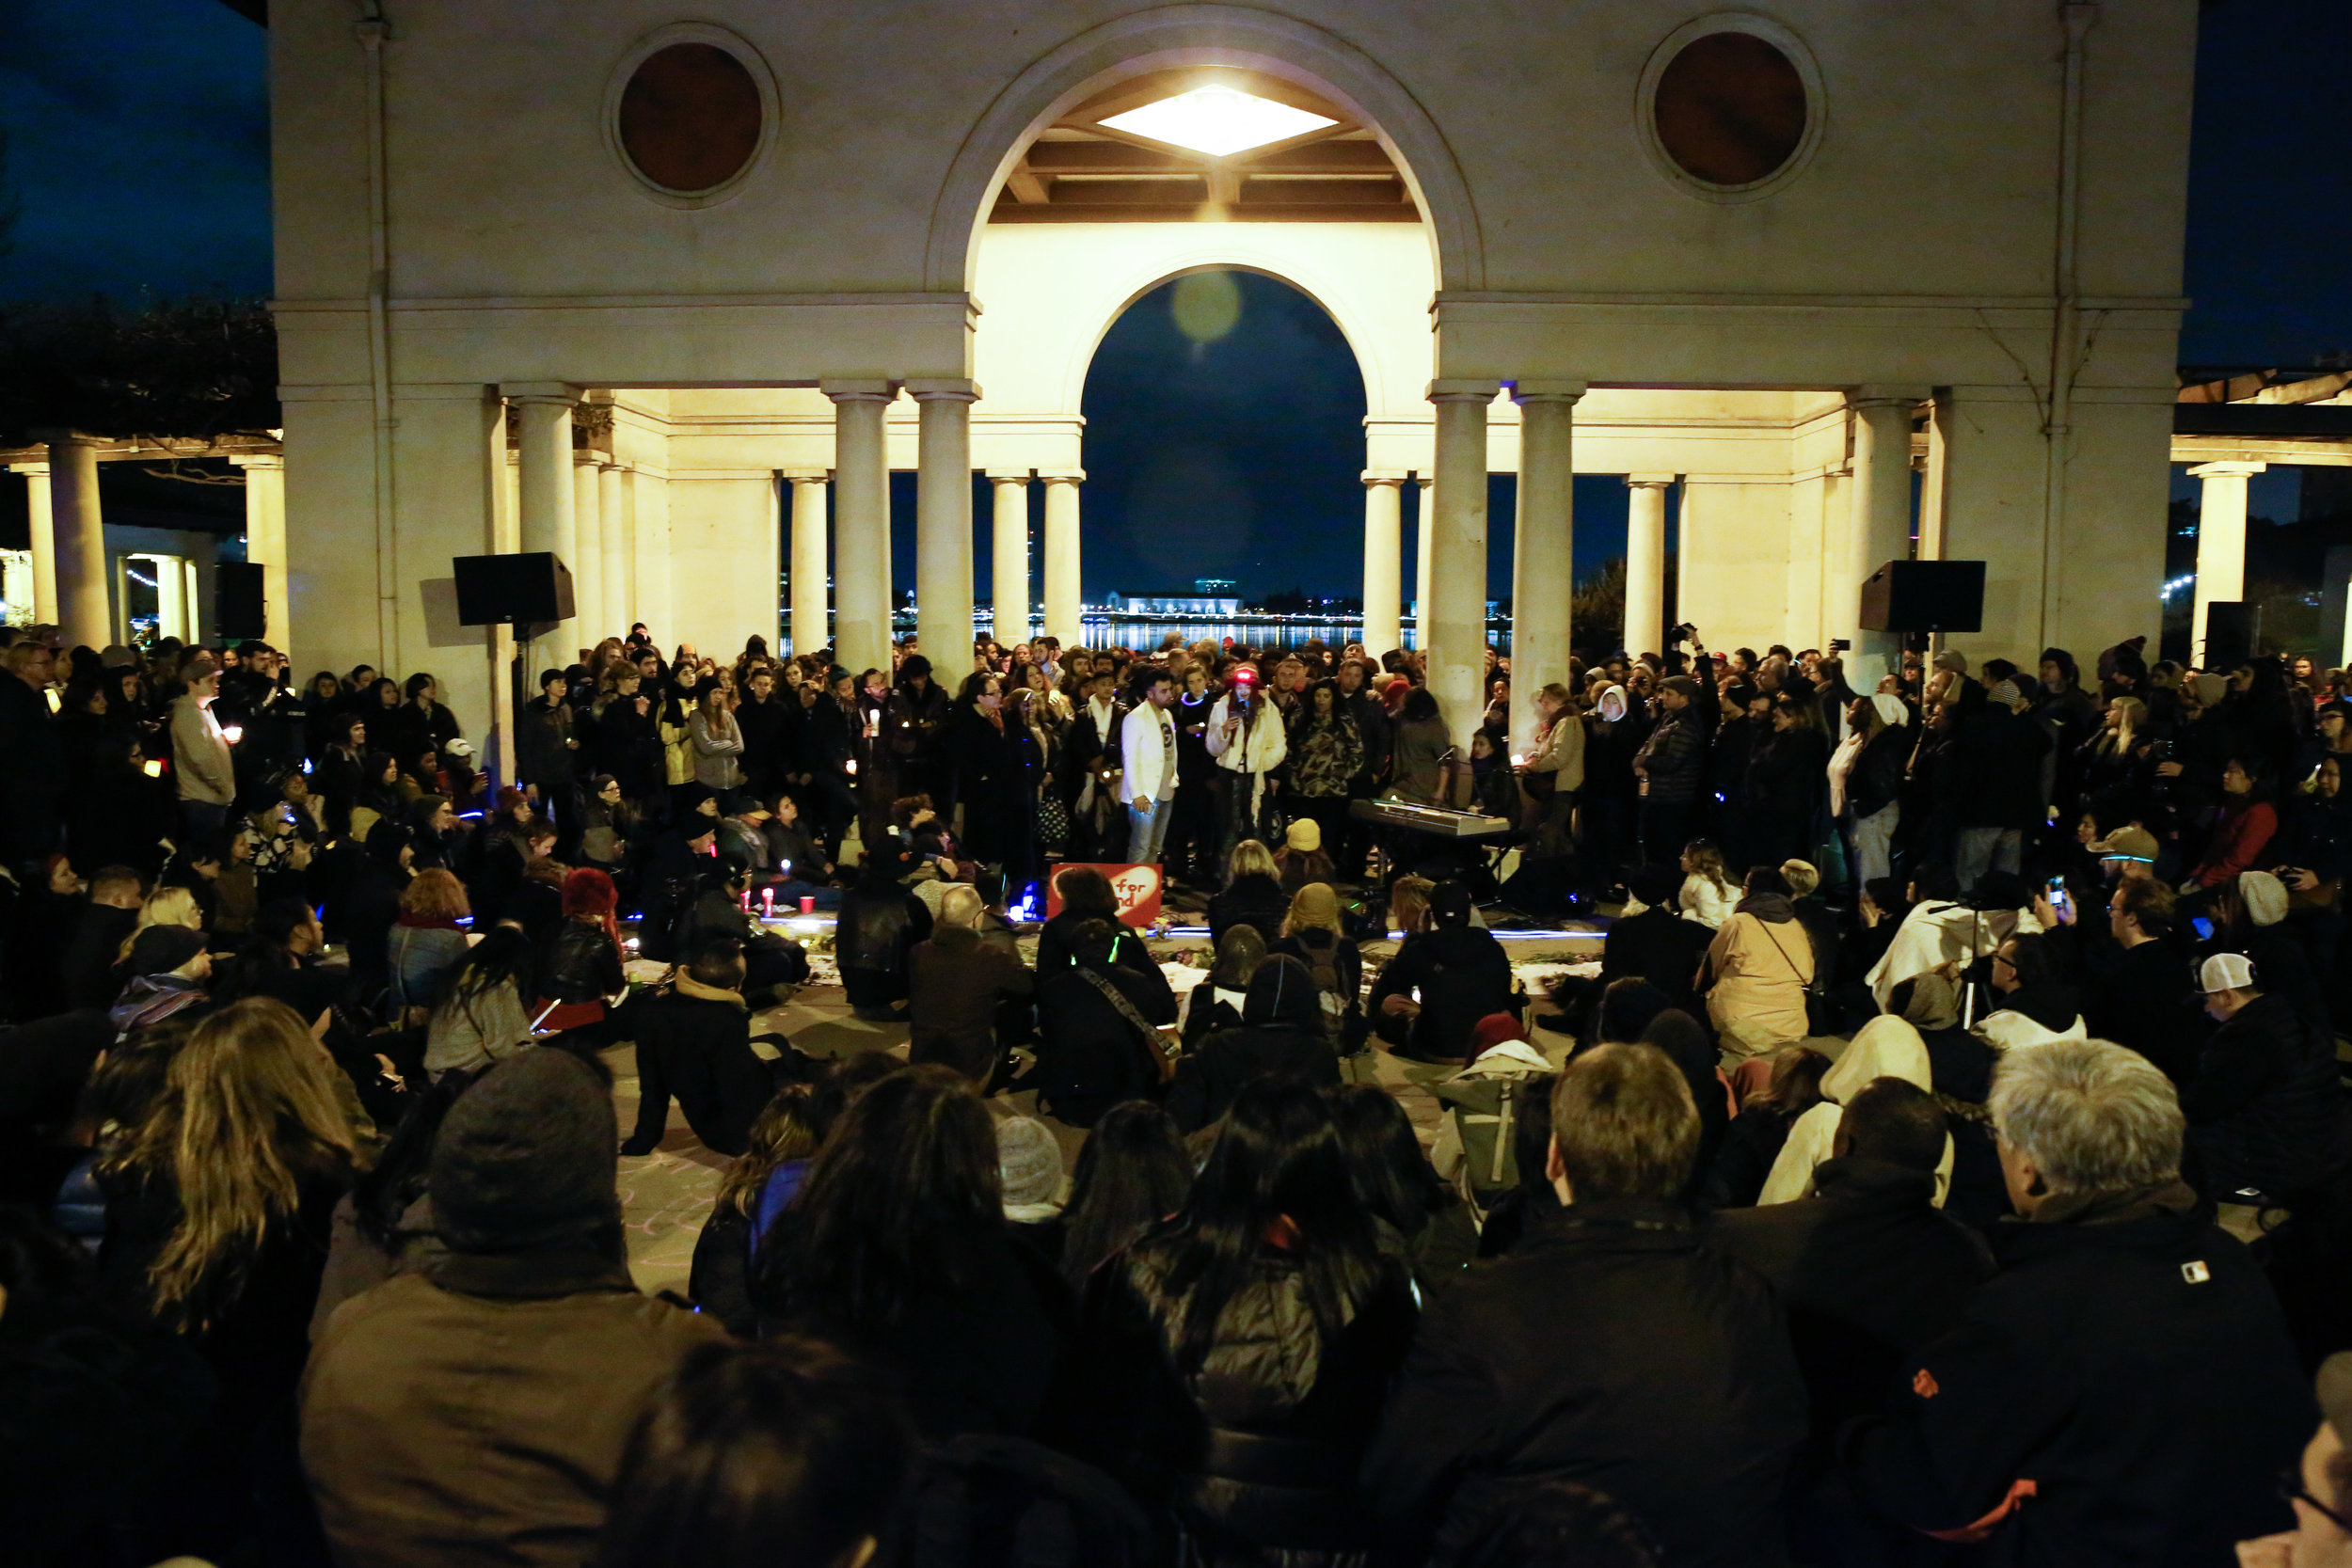  Mourners gather at a vigil for the victims of the fatal warehouse fire during a vigil at at Lake Merritt Pergola in Oakland, California, U.S. December 5, 2016.&nbsp; 